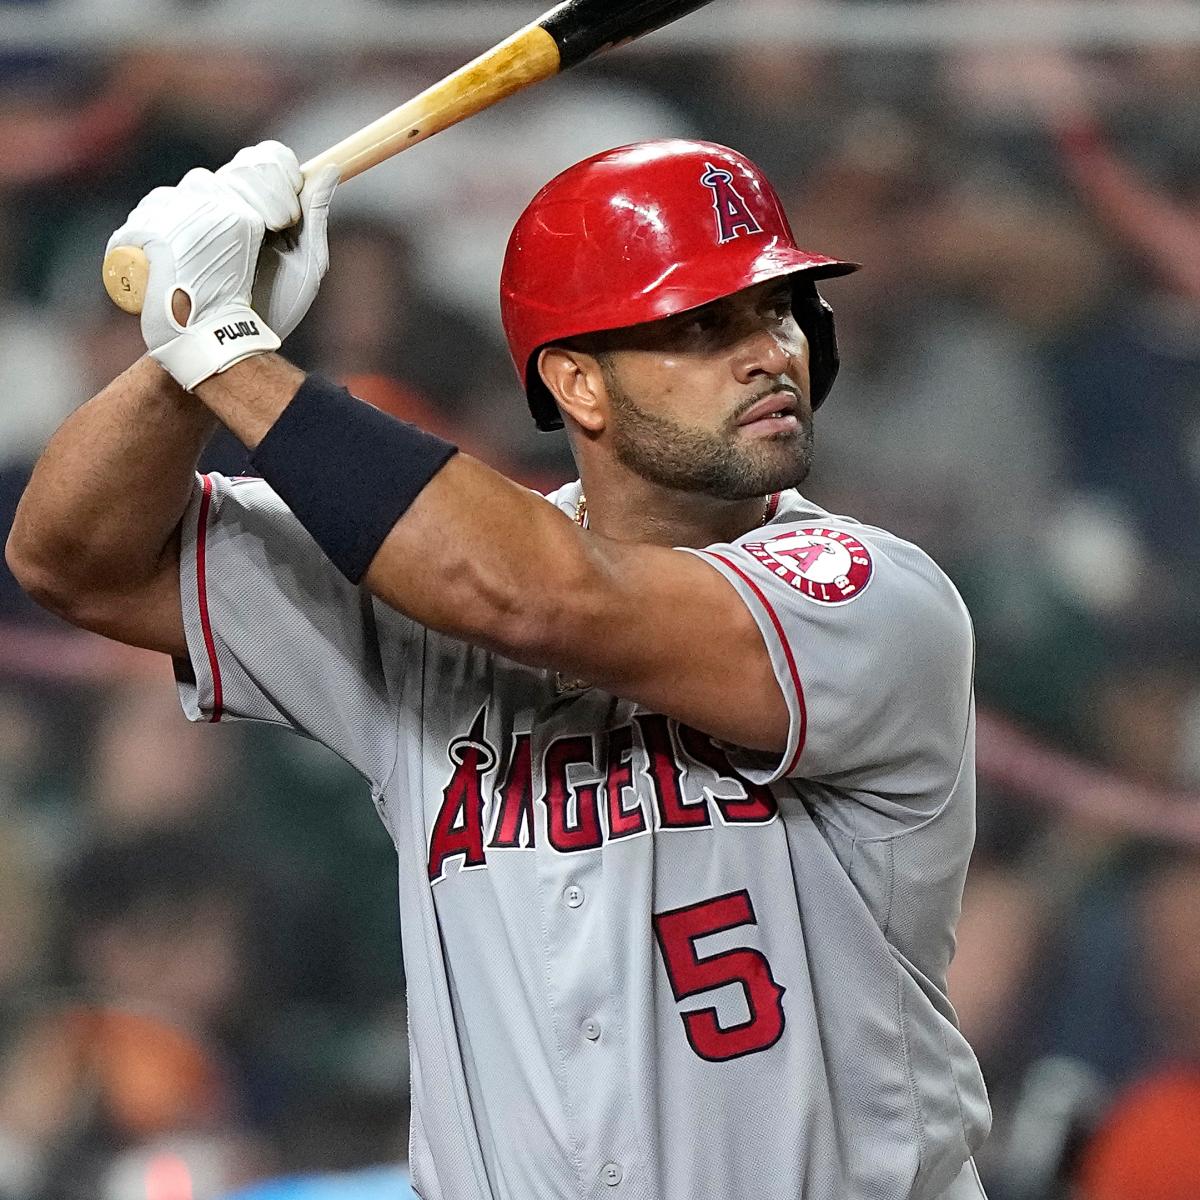 AP Source: Albert Pujols Signing With Los Angeles Dodgers